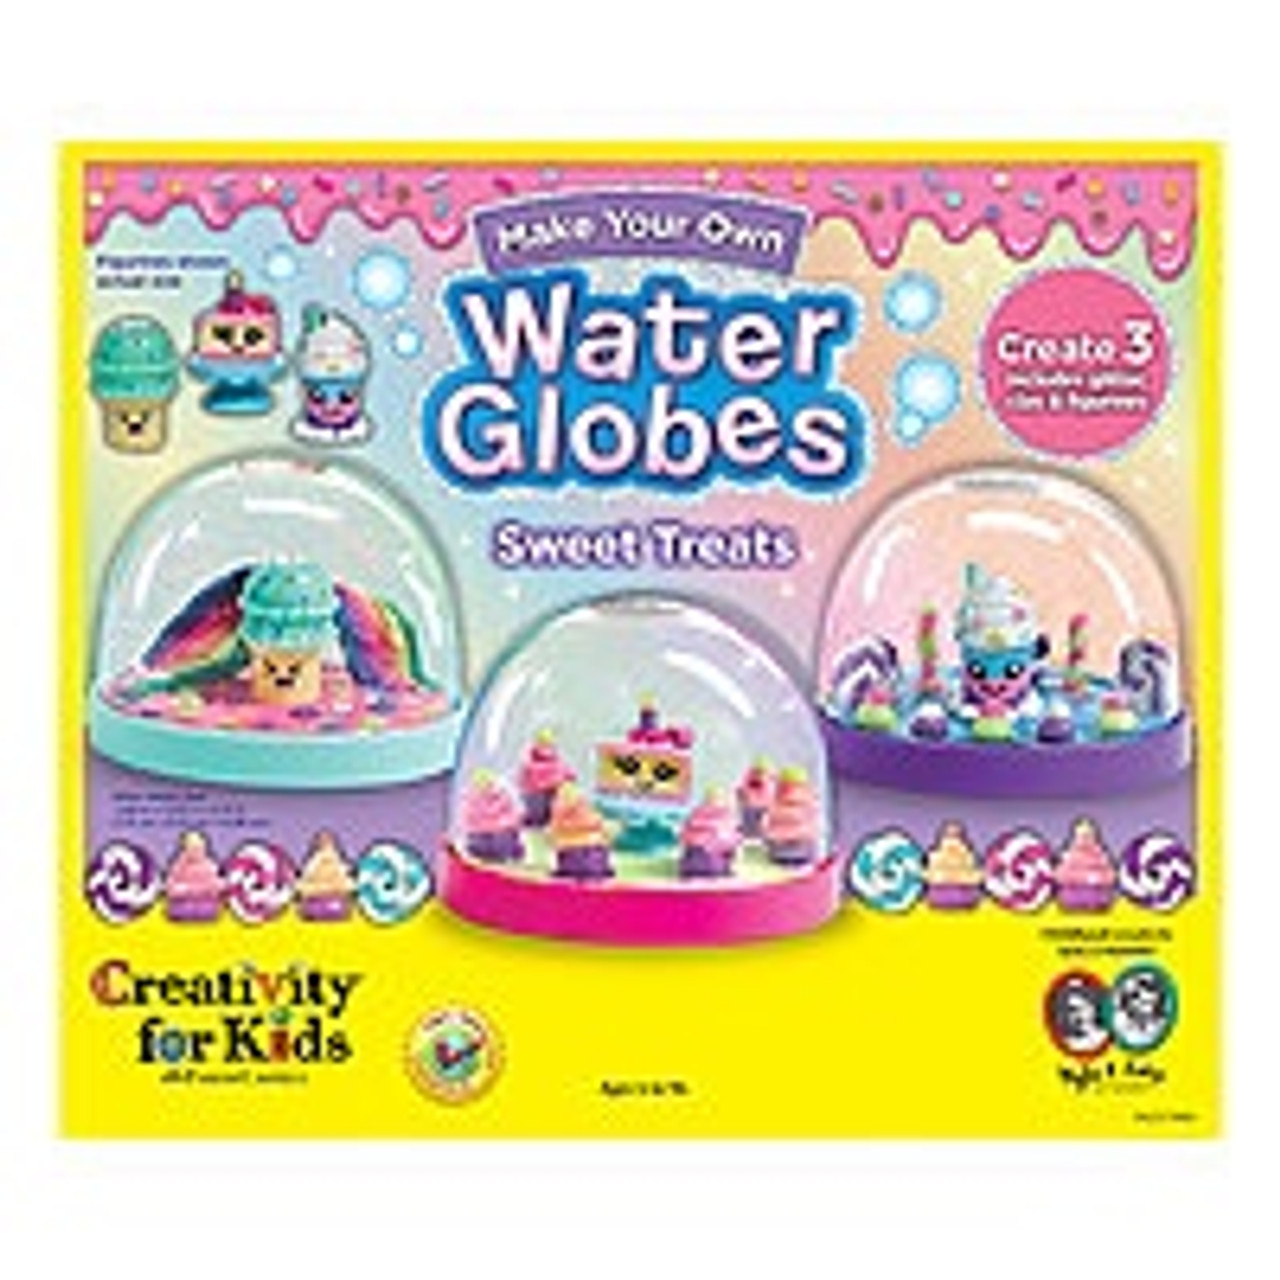 MAKE YOUR OWN WATER GLOBES SWEET TREATS